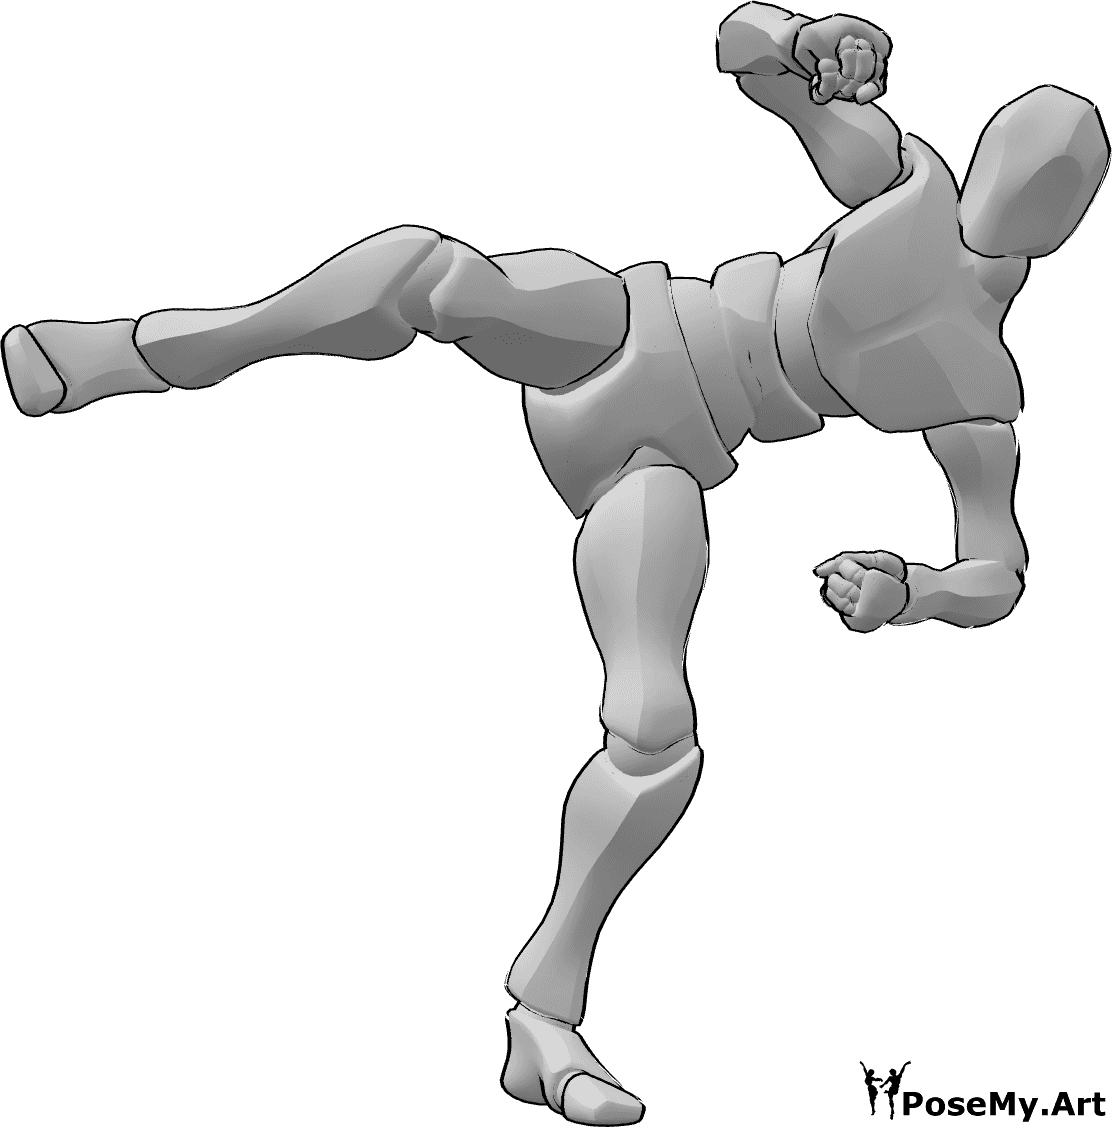 Pose Reference - Right foot kick pose - Male is standing and kicking high with his right foot, leg pose